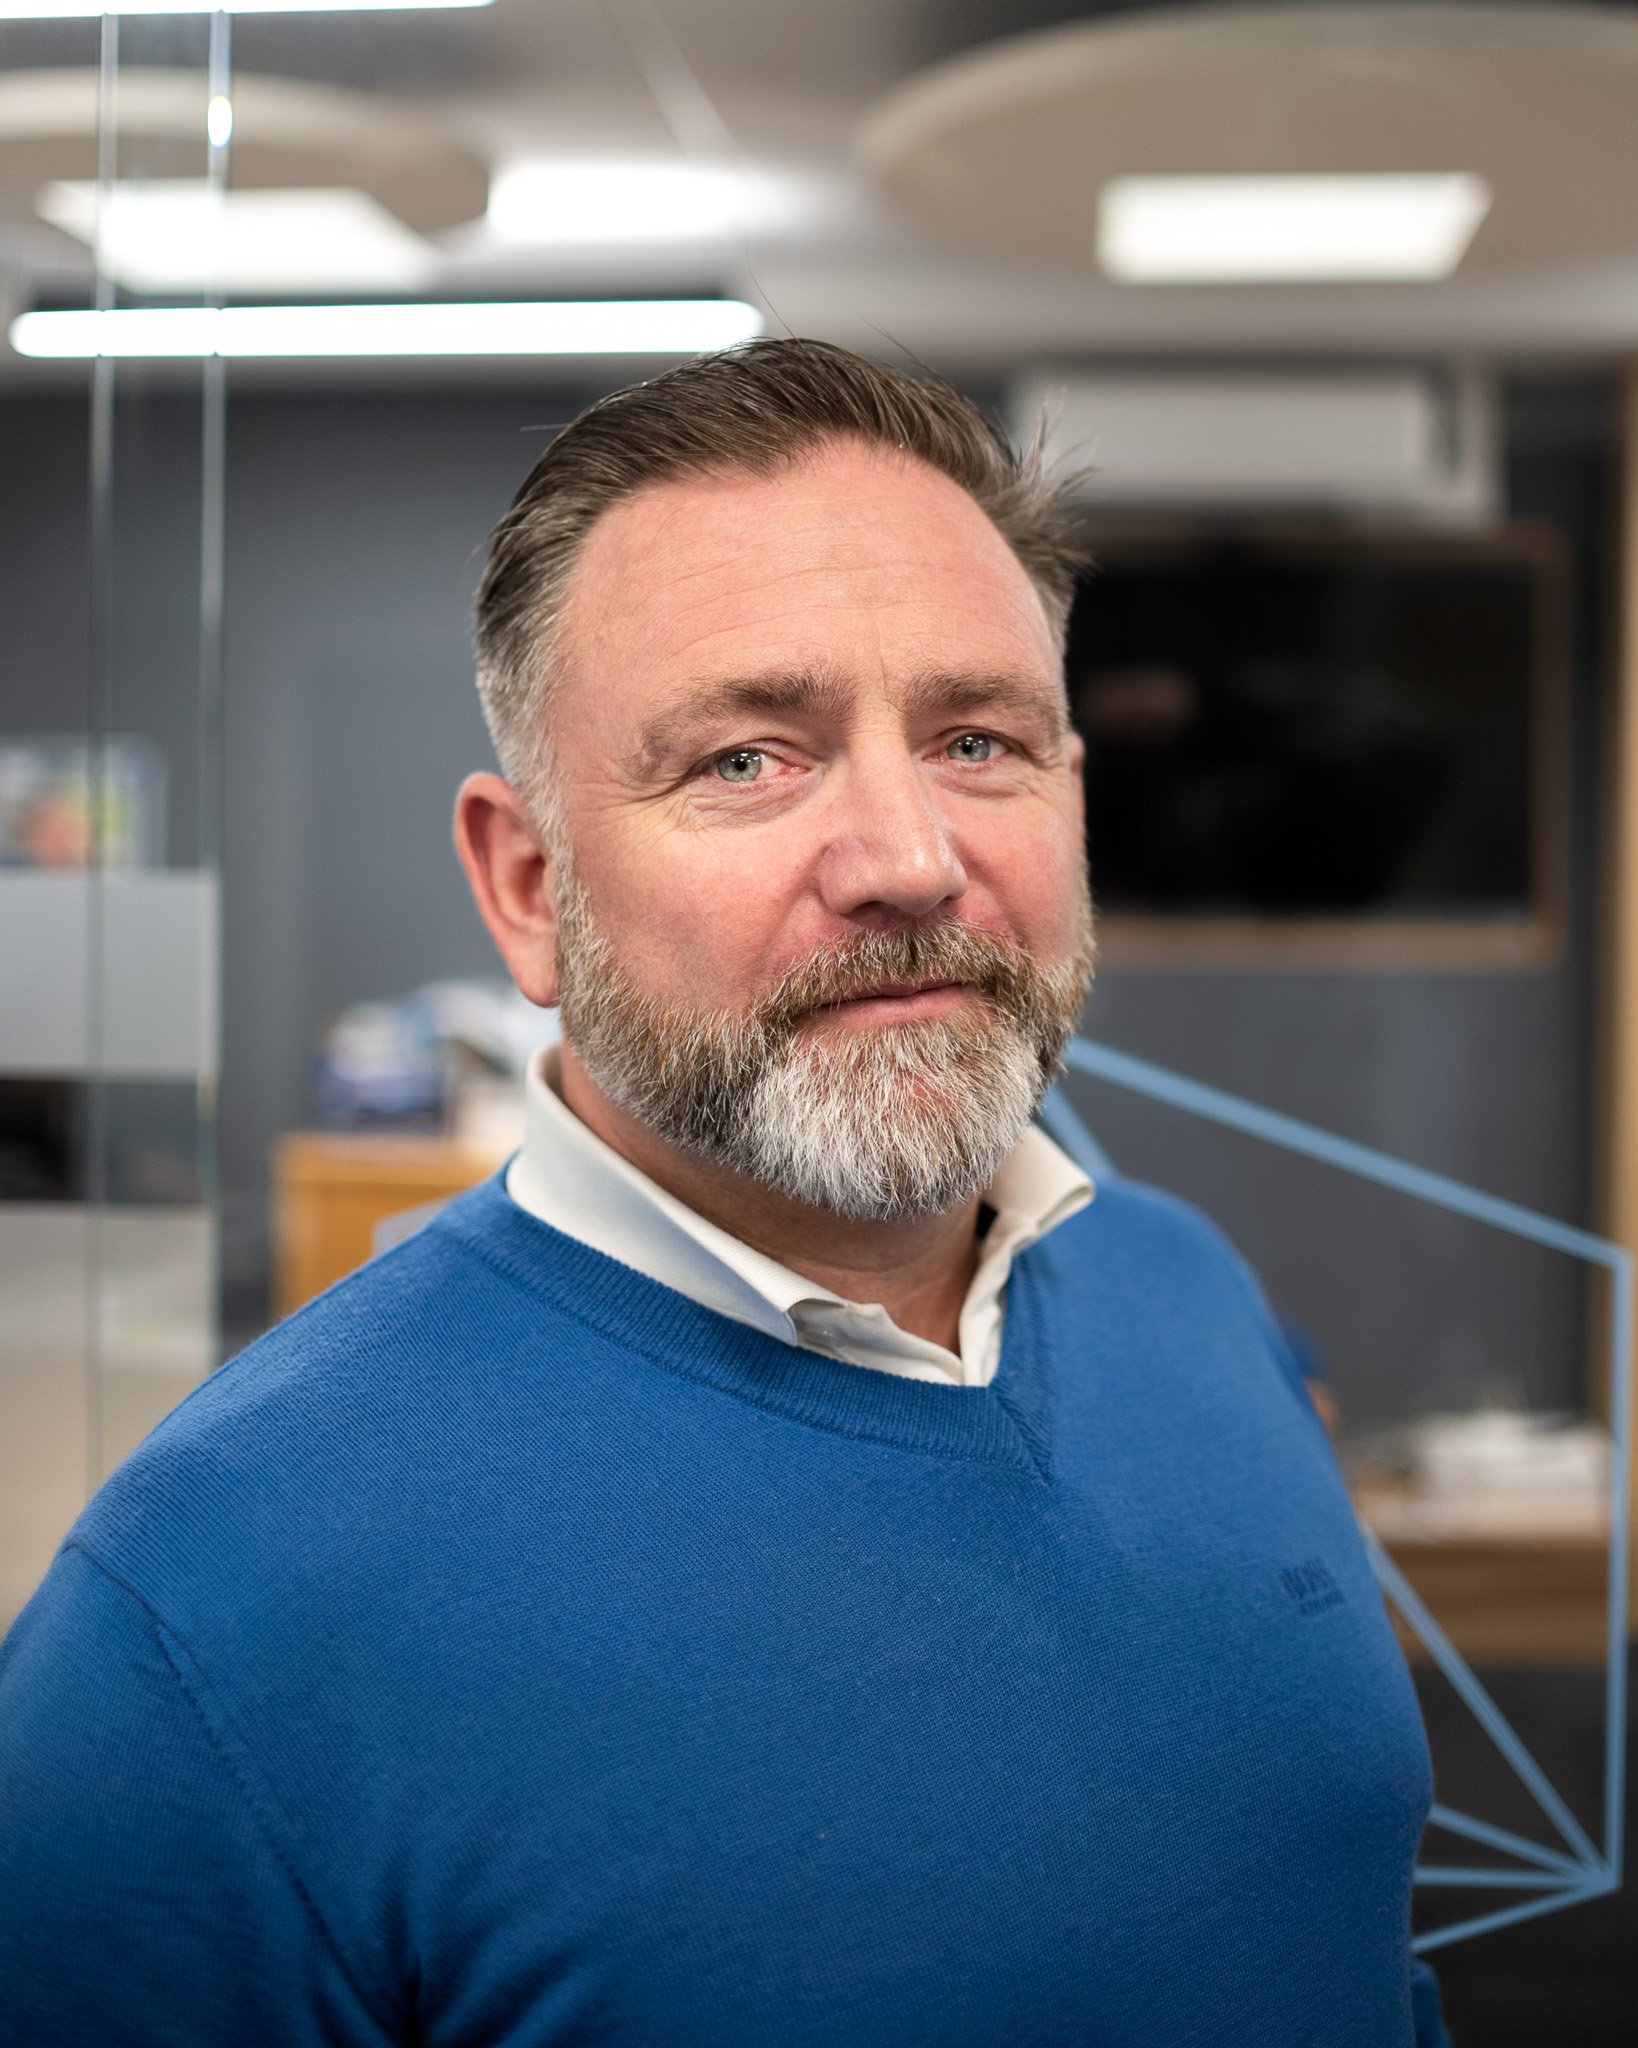 Staff Spotlight | Meet Mark

If you've interacted with ISS since its registration as a company over a decade ago, chances are you've come across our founder and director, Mark.

He's the man on the ground, ensuring everyone is in the right place doin